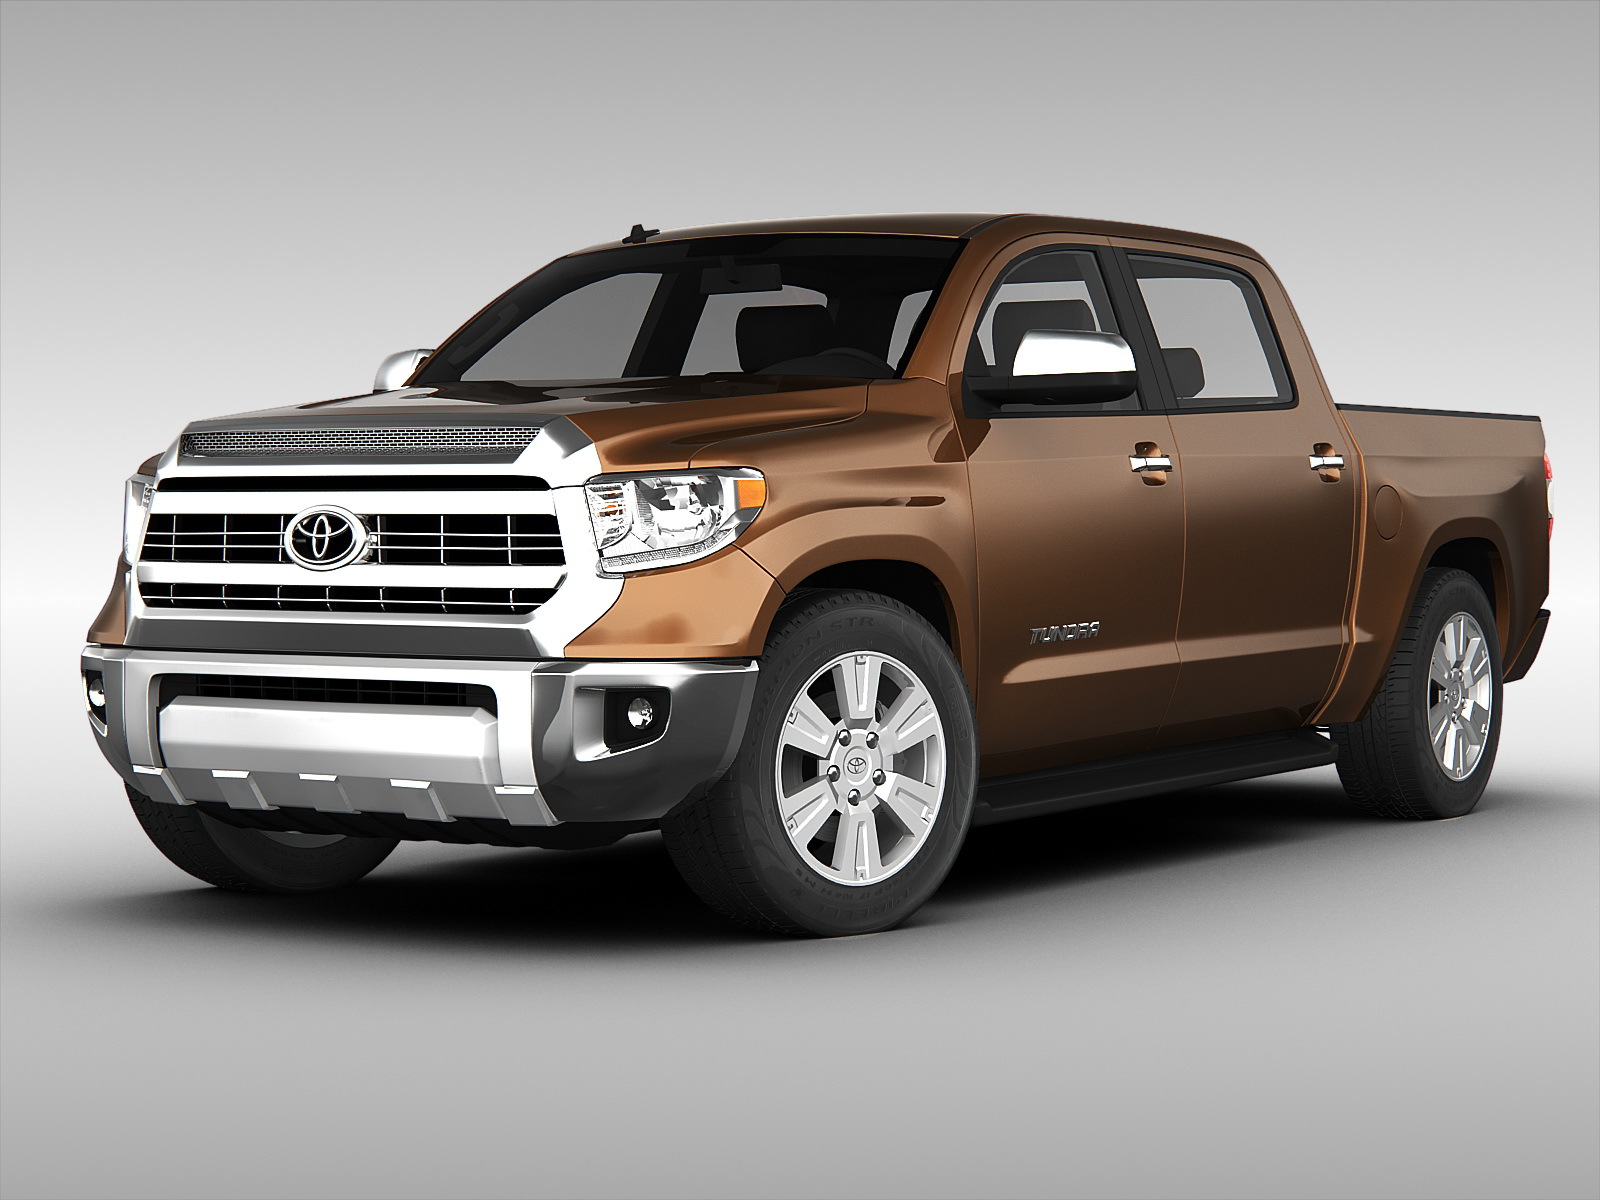 Toyota Tundra Wallpapers - image #364